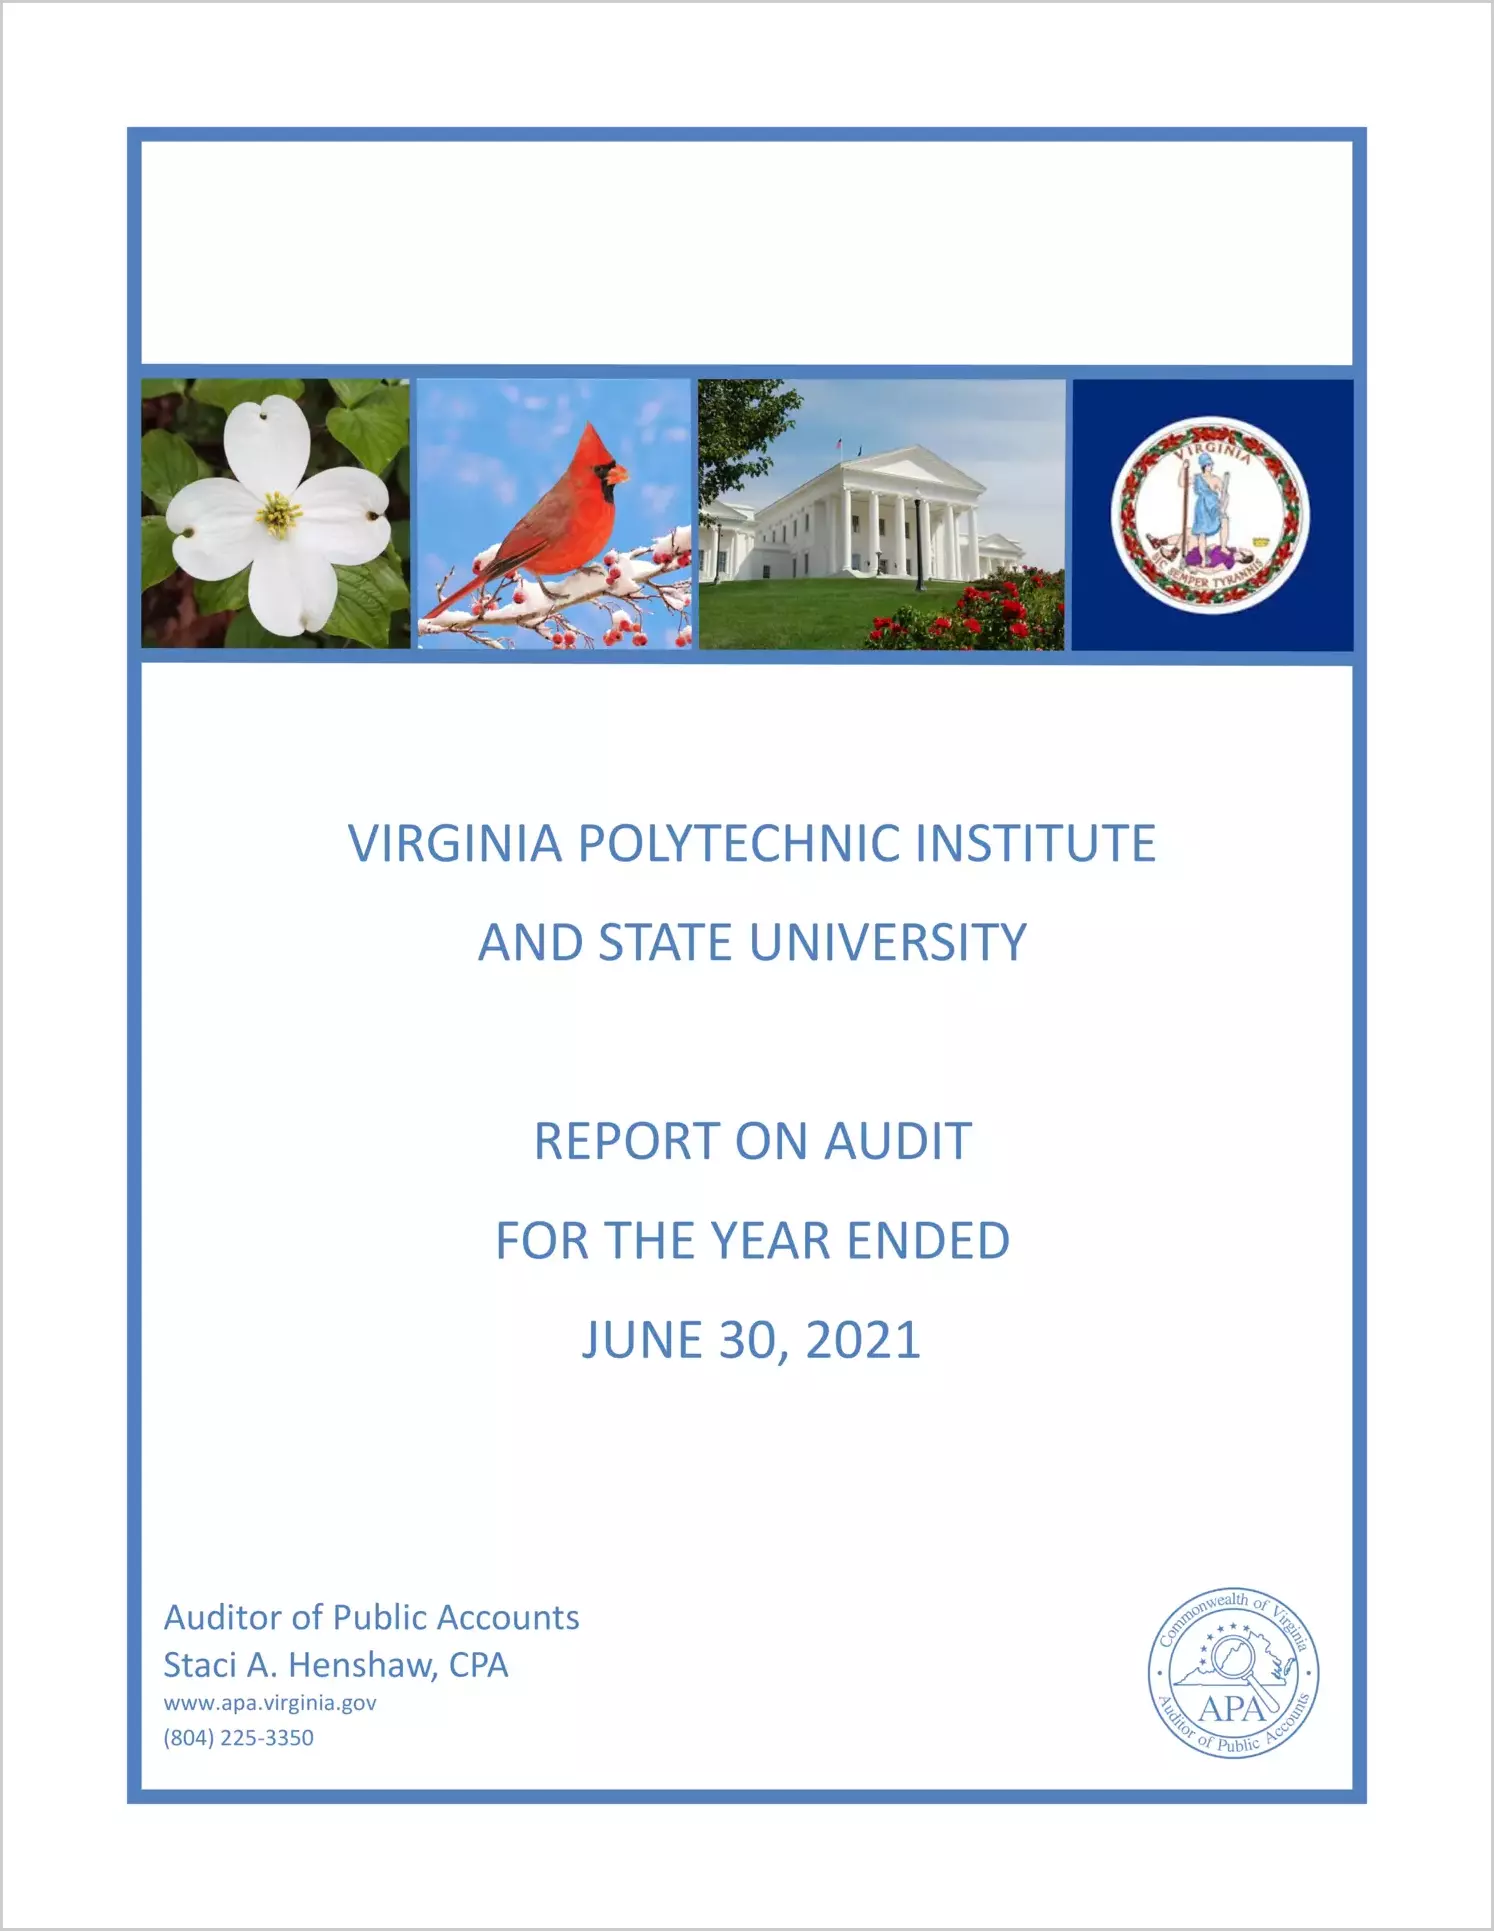 Virginia Polytechnic Institute and State University for the year ended June 30, 2021